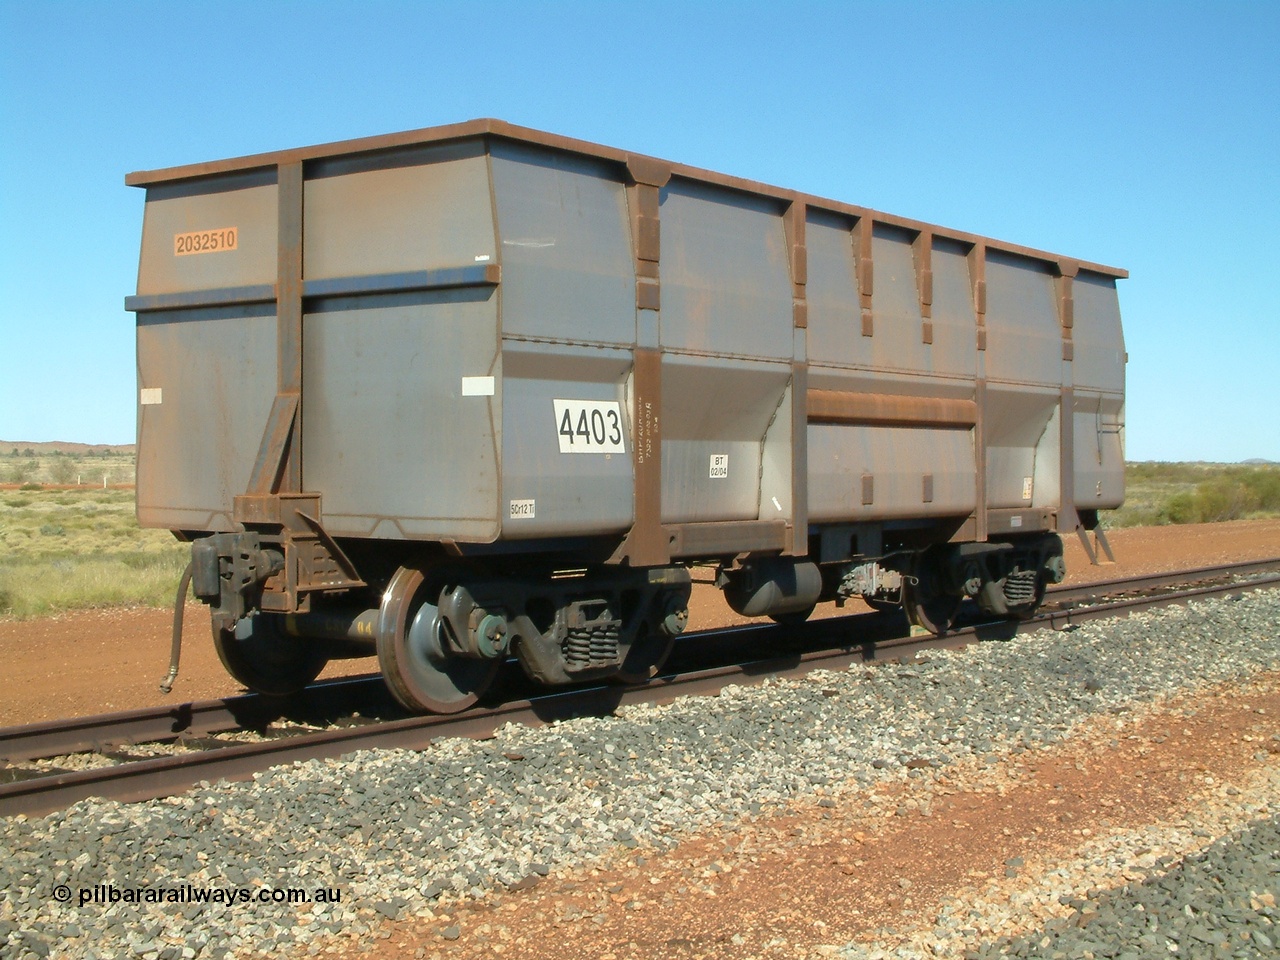 040801 144102
Walla Siding, Goninan built, Lynx Engineering designed ore waggon 4403 made from 5Cr12Ti stainless steel these waggons are known as Golynx waggons, asset number 203510 with serial 950124-004 and build date 02/2004. 1st August 2004.
Keywords: 4403;Goninan-WA;Golynx;BHP-ore-waggon;